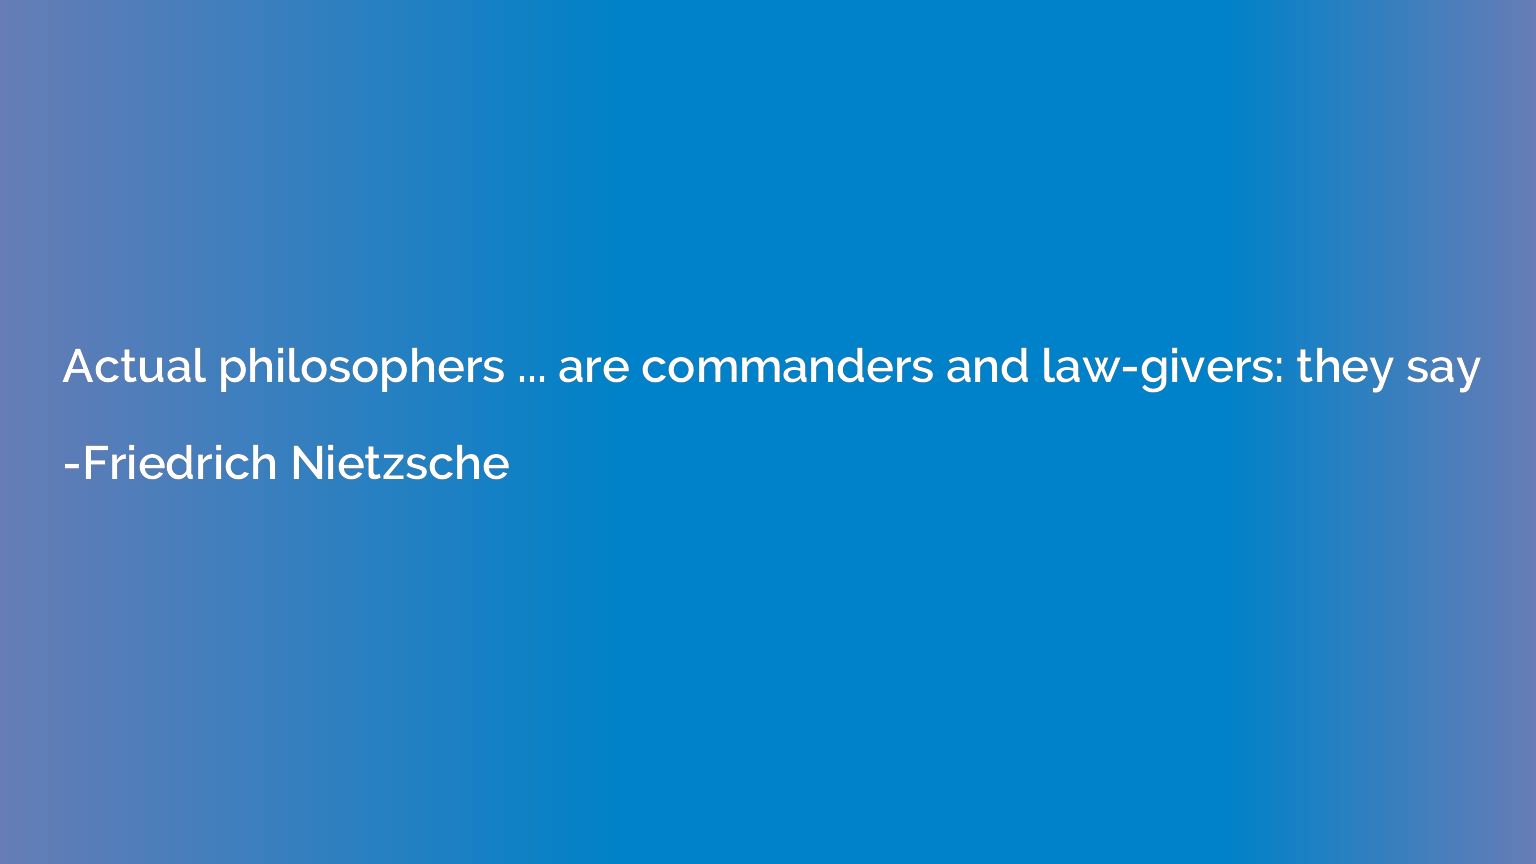 Actual philosophers ... are commanders and law-givers: they 